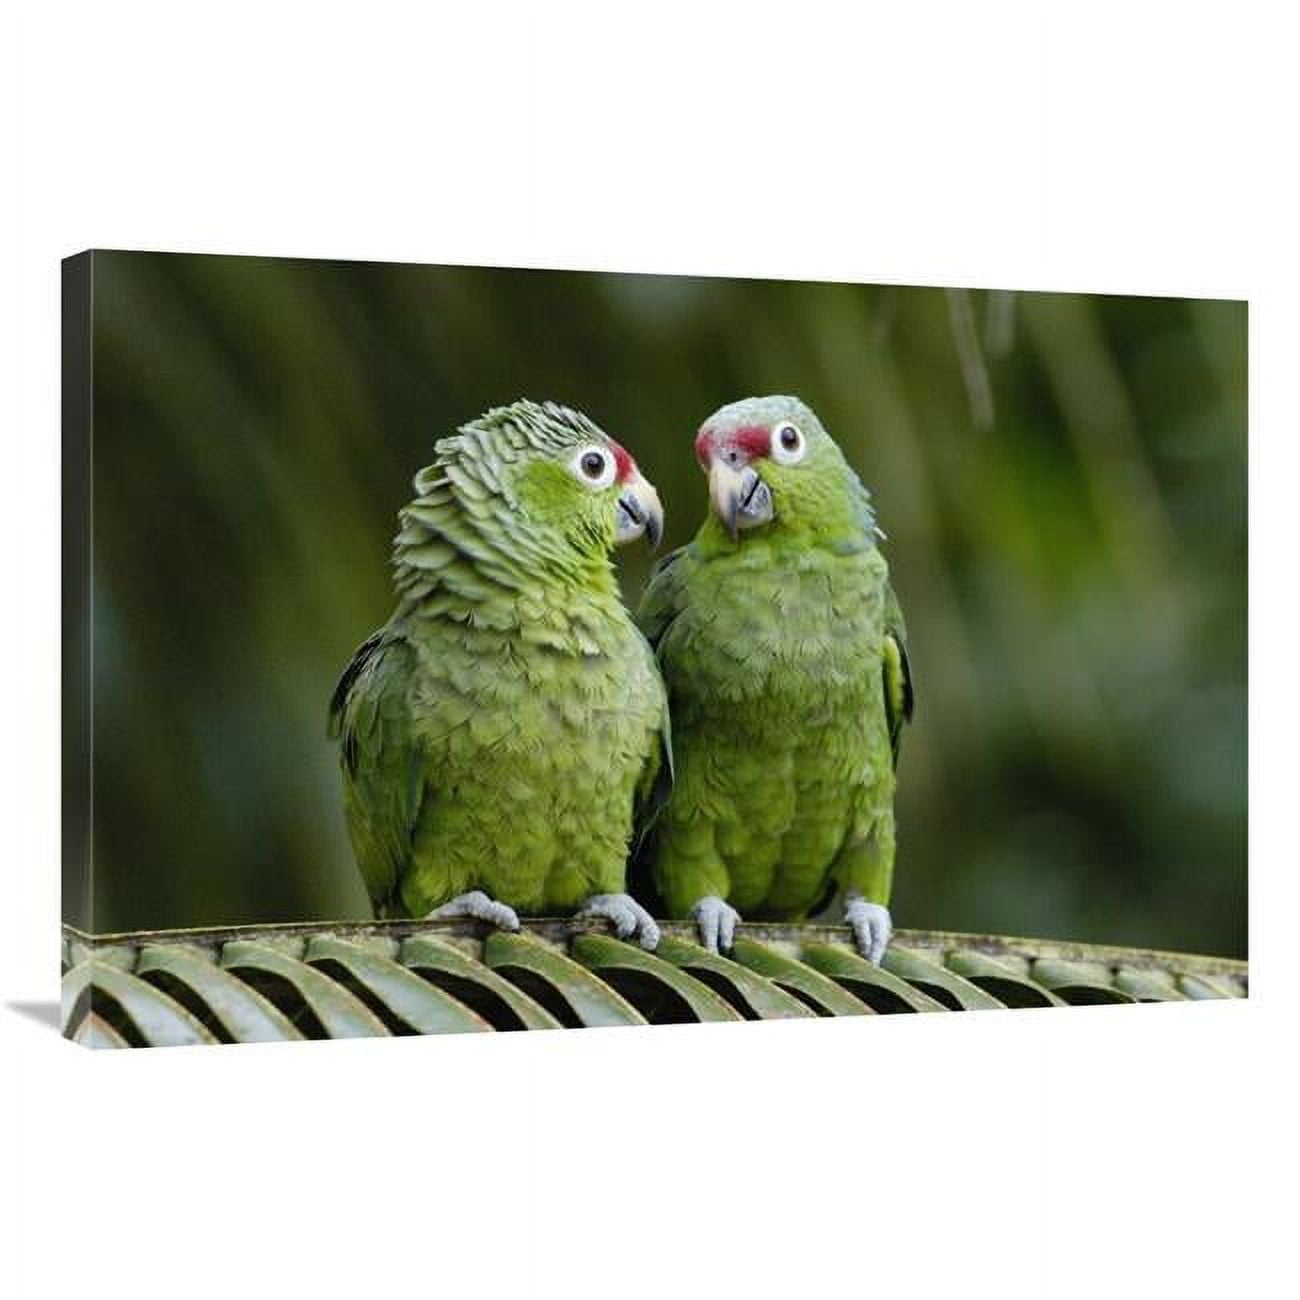 24 X 36 In. Red-lored Parrot Pair Sitting On Branch, Ecuador Art Print - Pete Oxford